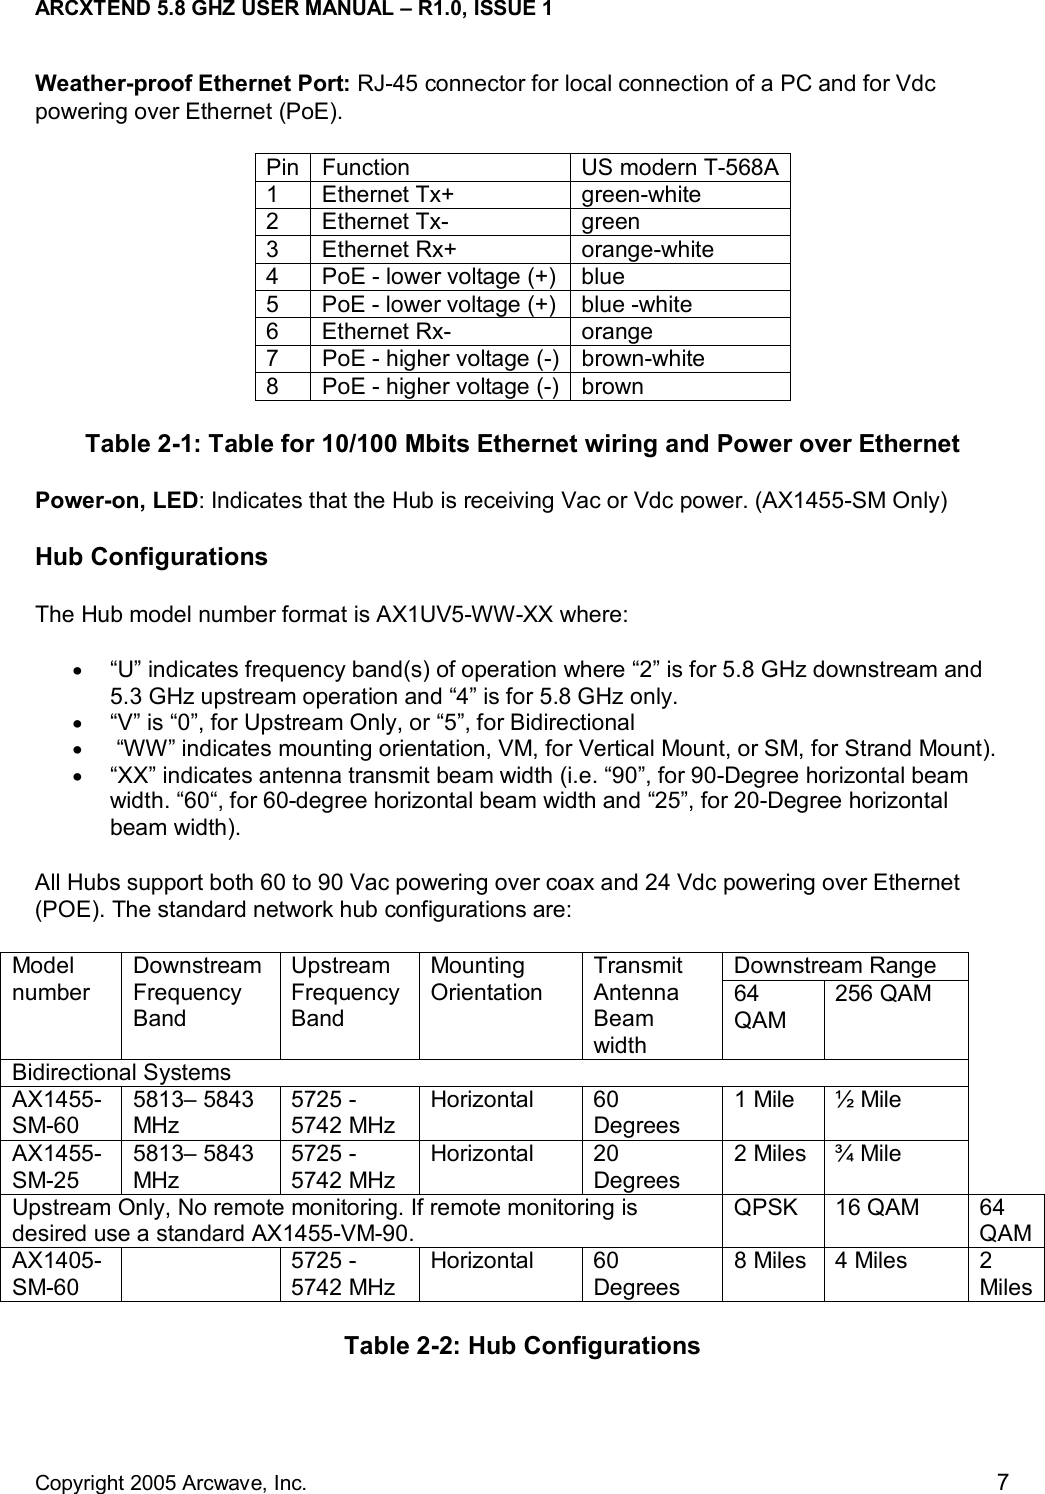 ARCXTEND 5.8 GHZ USER MANUAL – R1.0, ISSUE 1  Copyright 2005 Arcwave, Inc.    7 Weather-proof Ethernet Port: RJ-45 connector for local connection of a PC and for Vdc powering over Ethernet (PoE).  Pin   Function   US modern T-568A  1   Ethernet Tx+   green-white  2   Ethernet Tx-   green  3   Ethernet Rx+   orange-white  4   PoE - lower voltage (+)  blue  5   PoE - lower voltage (+)  blue -white  6   Ethernet Rx-   orange  7   PoE - higher voltage (-)  brown-white  8   PoE - higher voltage (-)  brown  Table 2-1: Table for 10/100 Mbits Ethernet wiring and Power over Ethernet Power-on, LED: Indicates that the Hub is receiving Vac or Vdc power. (AX1455-SM Only) Hub Configurations The Hub model number format is AX1UV5-WW-XX where: •  “U” indicates frequency band(s) of operation where “2” is for 5.8 GHz downstream and 5.3 GHz upstream operation and “4” is for 5.8 GHz only. •  “V” is “0”, for Upstream Only, or “5”, for Bidirectional •   “WW” indicates mounting orientation, VM, for Vertical Mount, or SM, for Strand Mount).  •  “XX” indicates antenna transmit beam width (i.e. “90”, for 90-Degree horizontal beam width. “60“, for 60-degree horizontal beam width and “25”, for 20-Degree horizontal beam width). All Hubs support both 60 to 90 Vac powering over coax and 24 Vdc powering over Ethernet (POE). The standard network hub configurations are: Downstream Range Model number Downstream Frequency Band Upstream Frequency Band Mounting Orientation Transmit Antenna Beam width 64 QAM 256 QAM Bidirectional Systems AX1455-SM-60 5813– 5843 MHz 5725 - 5742 MHz Horizontal 60 Degrees 1 Mile  ½ Mile AX1455-SM-25 5813– 5843 MHz 5725 - 5742 MHz Horizontal 20 Degrees 2 Miles  ¾ Mile Upstream Only, No remote monitoring. If remote monitoring is desired use a standard AX1455-VM-90. QPSK 16 QAM  64 QAMAX1405-SM-60  5725 - 5742 MHz Horizontal 60 Degrees 8 Miles  4 Miles  2 MilesTable 2-2: Hub Configurations 